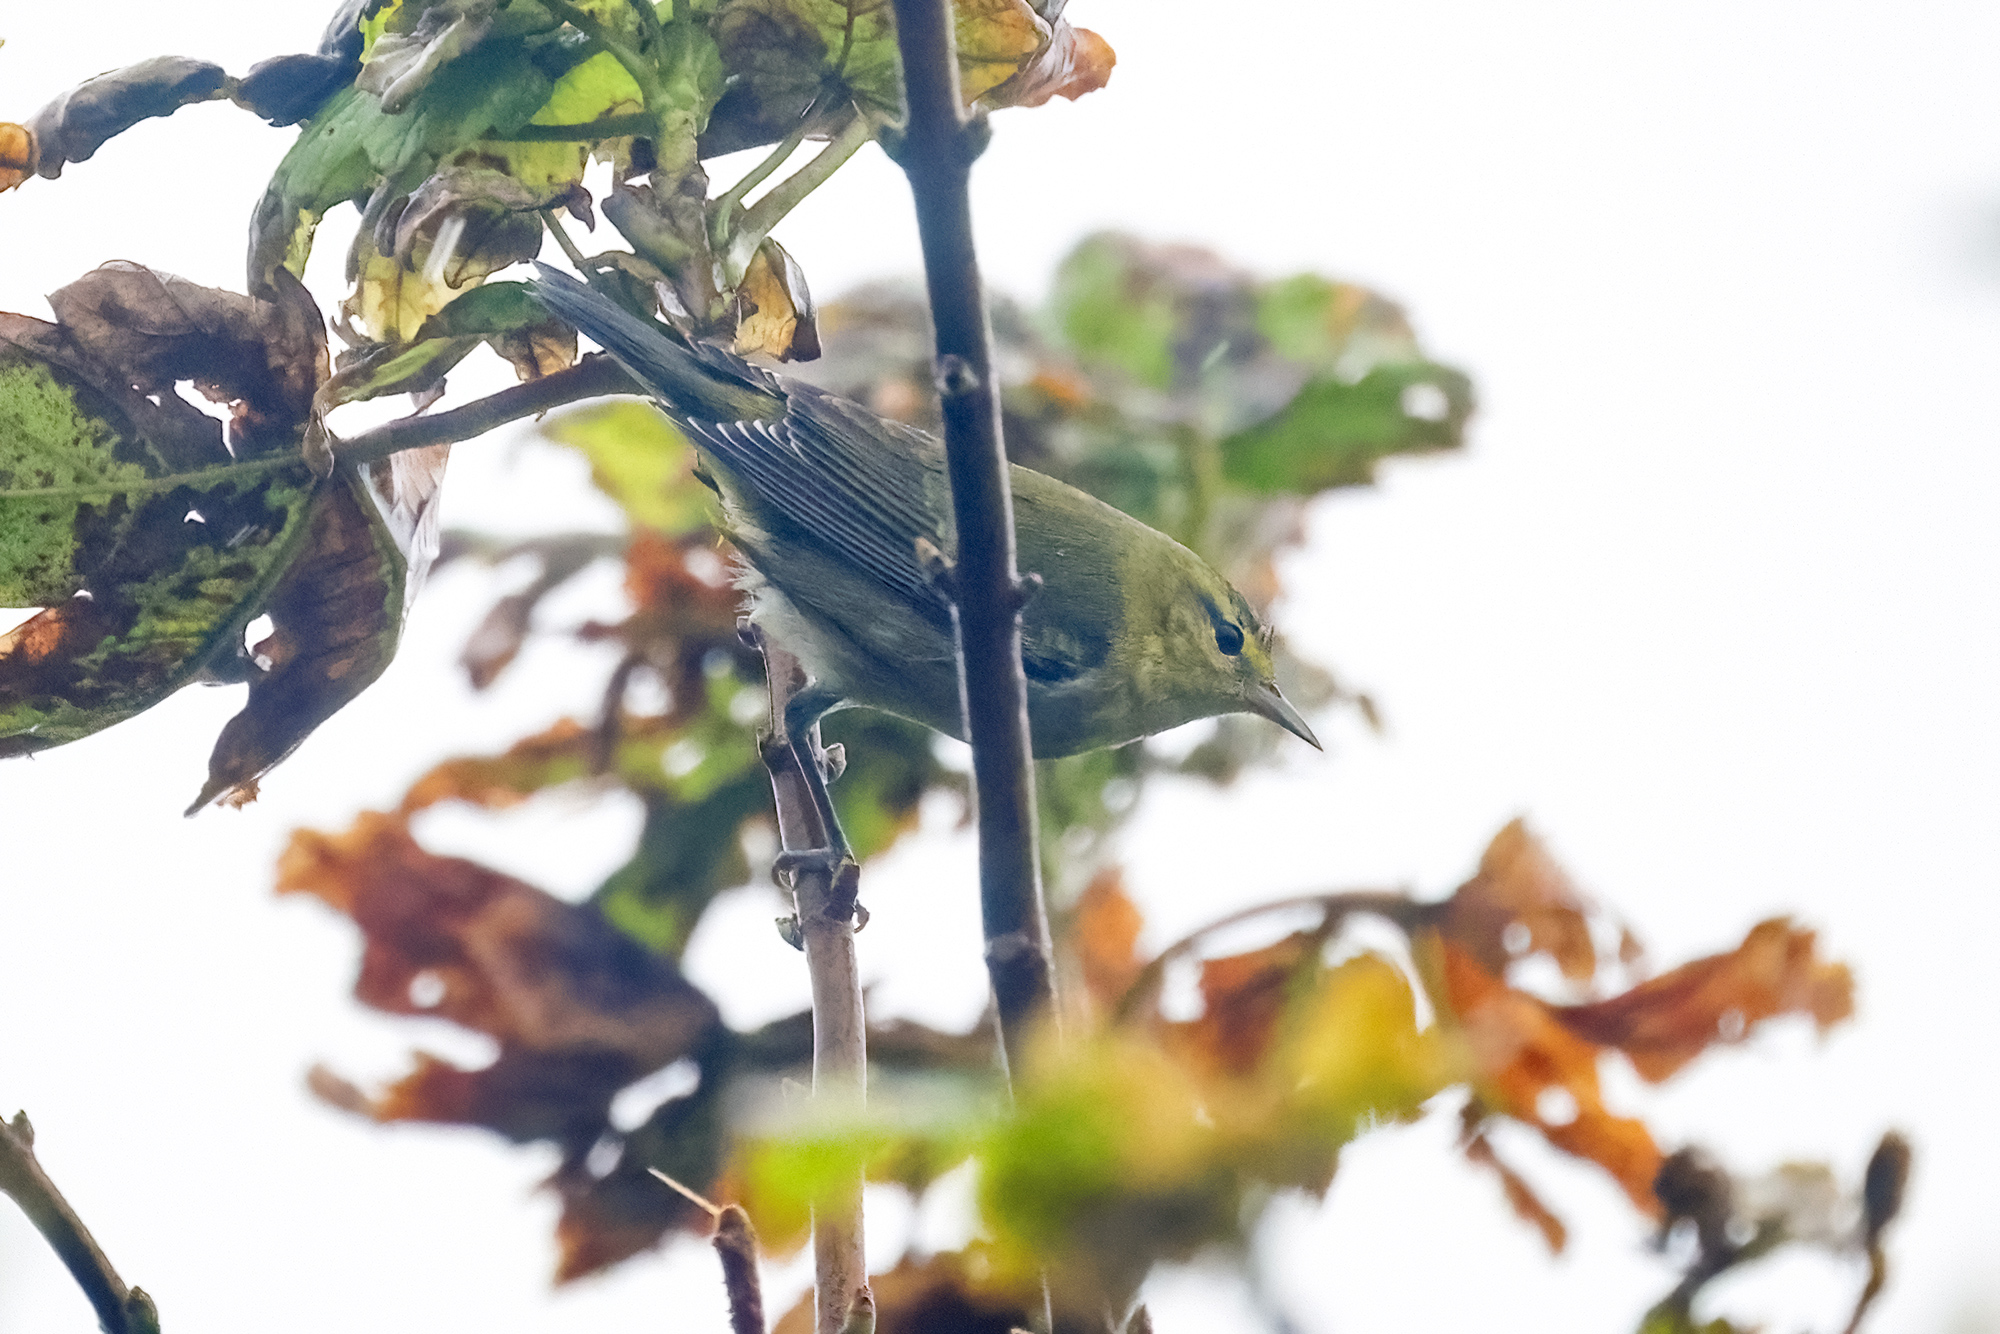 Tennessee Warbler, Co. Galway, Ireland.